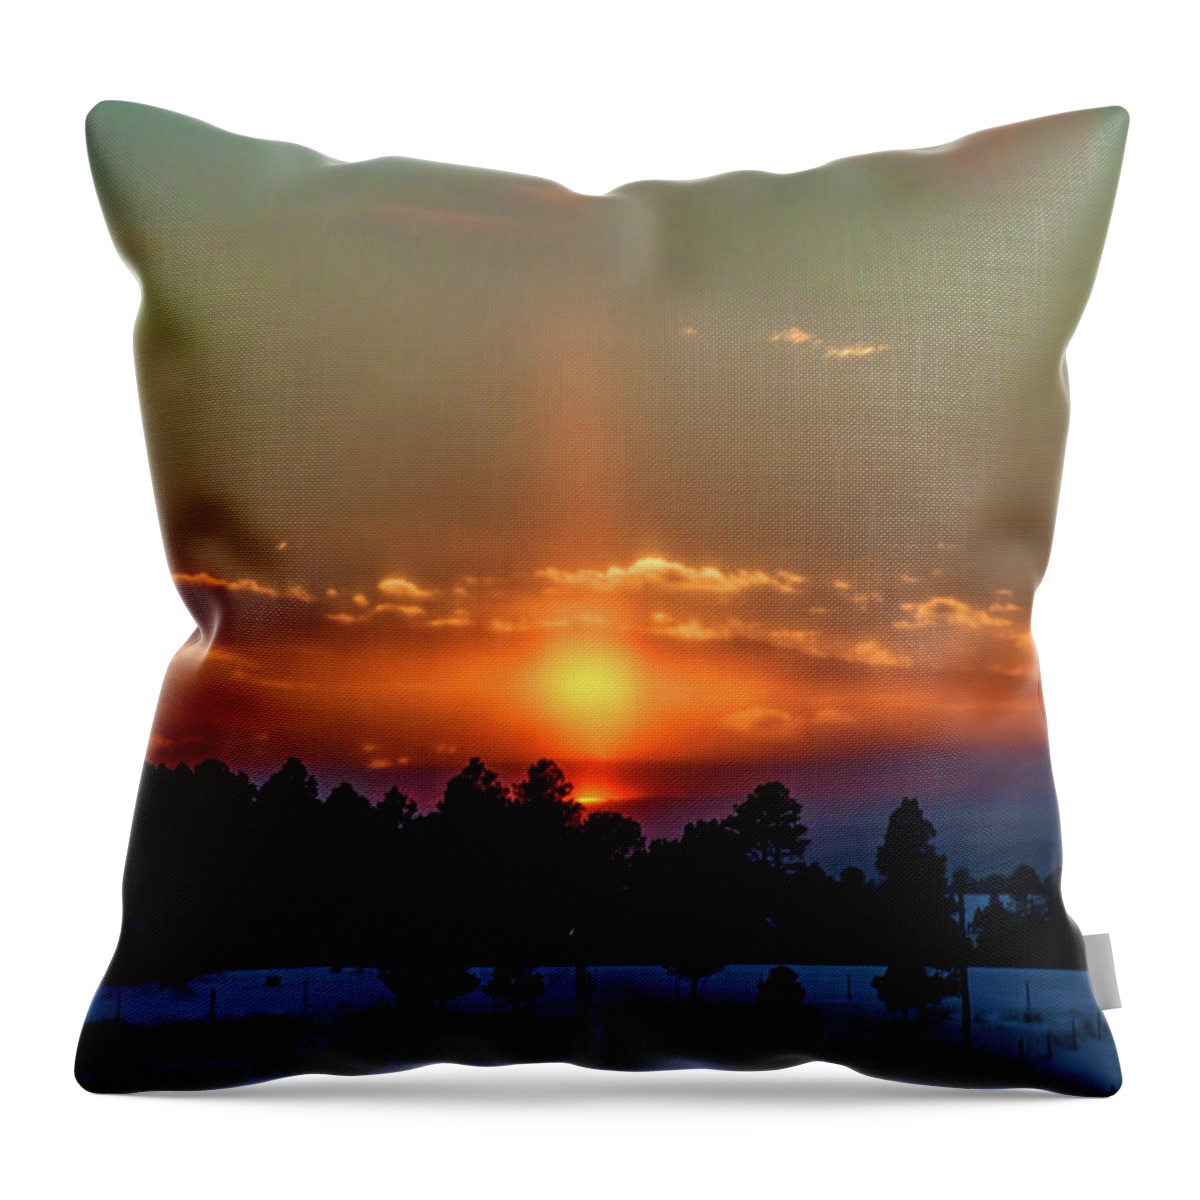 Sunset Throw Pillow featuring the photograph February Sunset by Alana Thrower